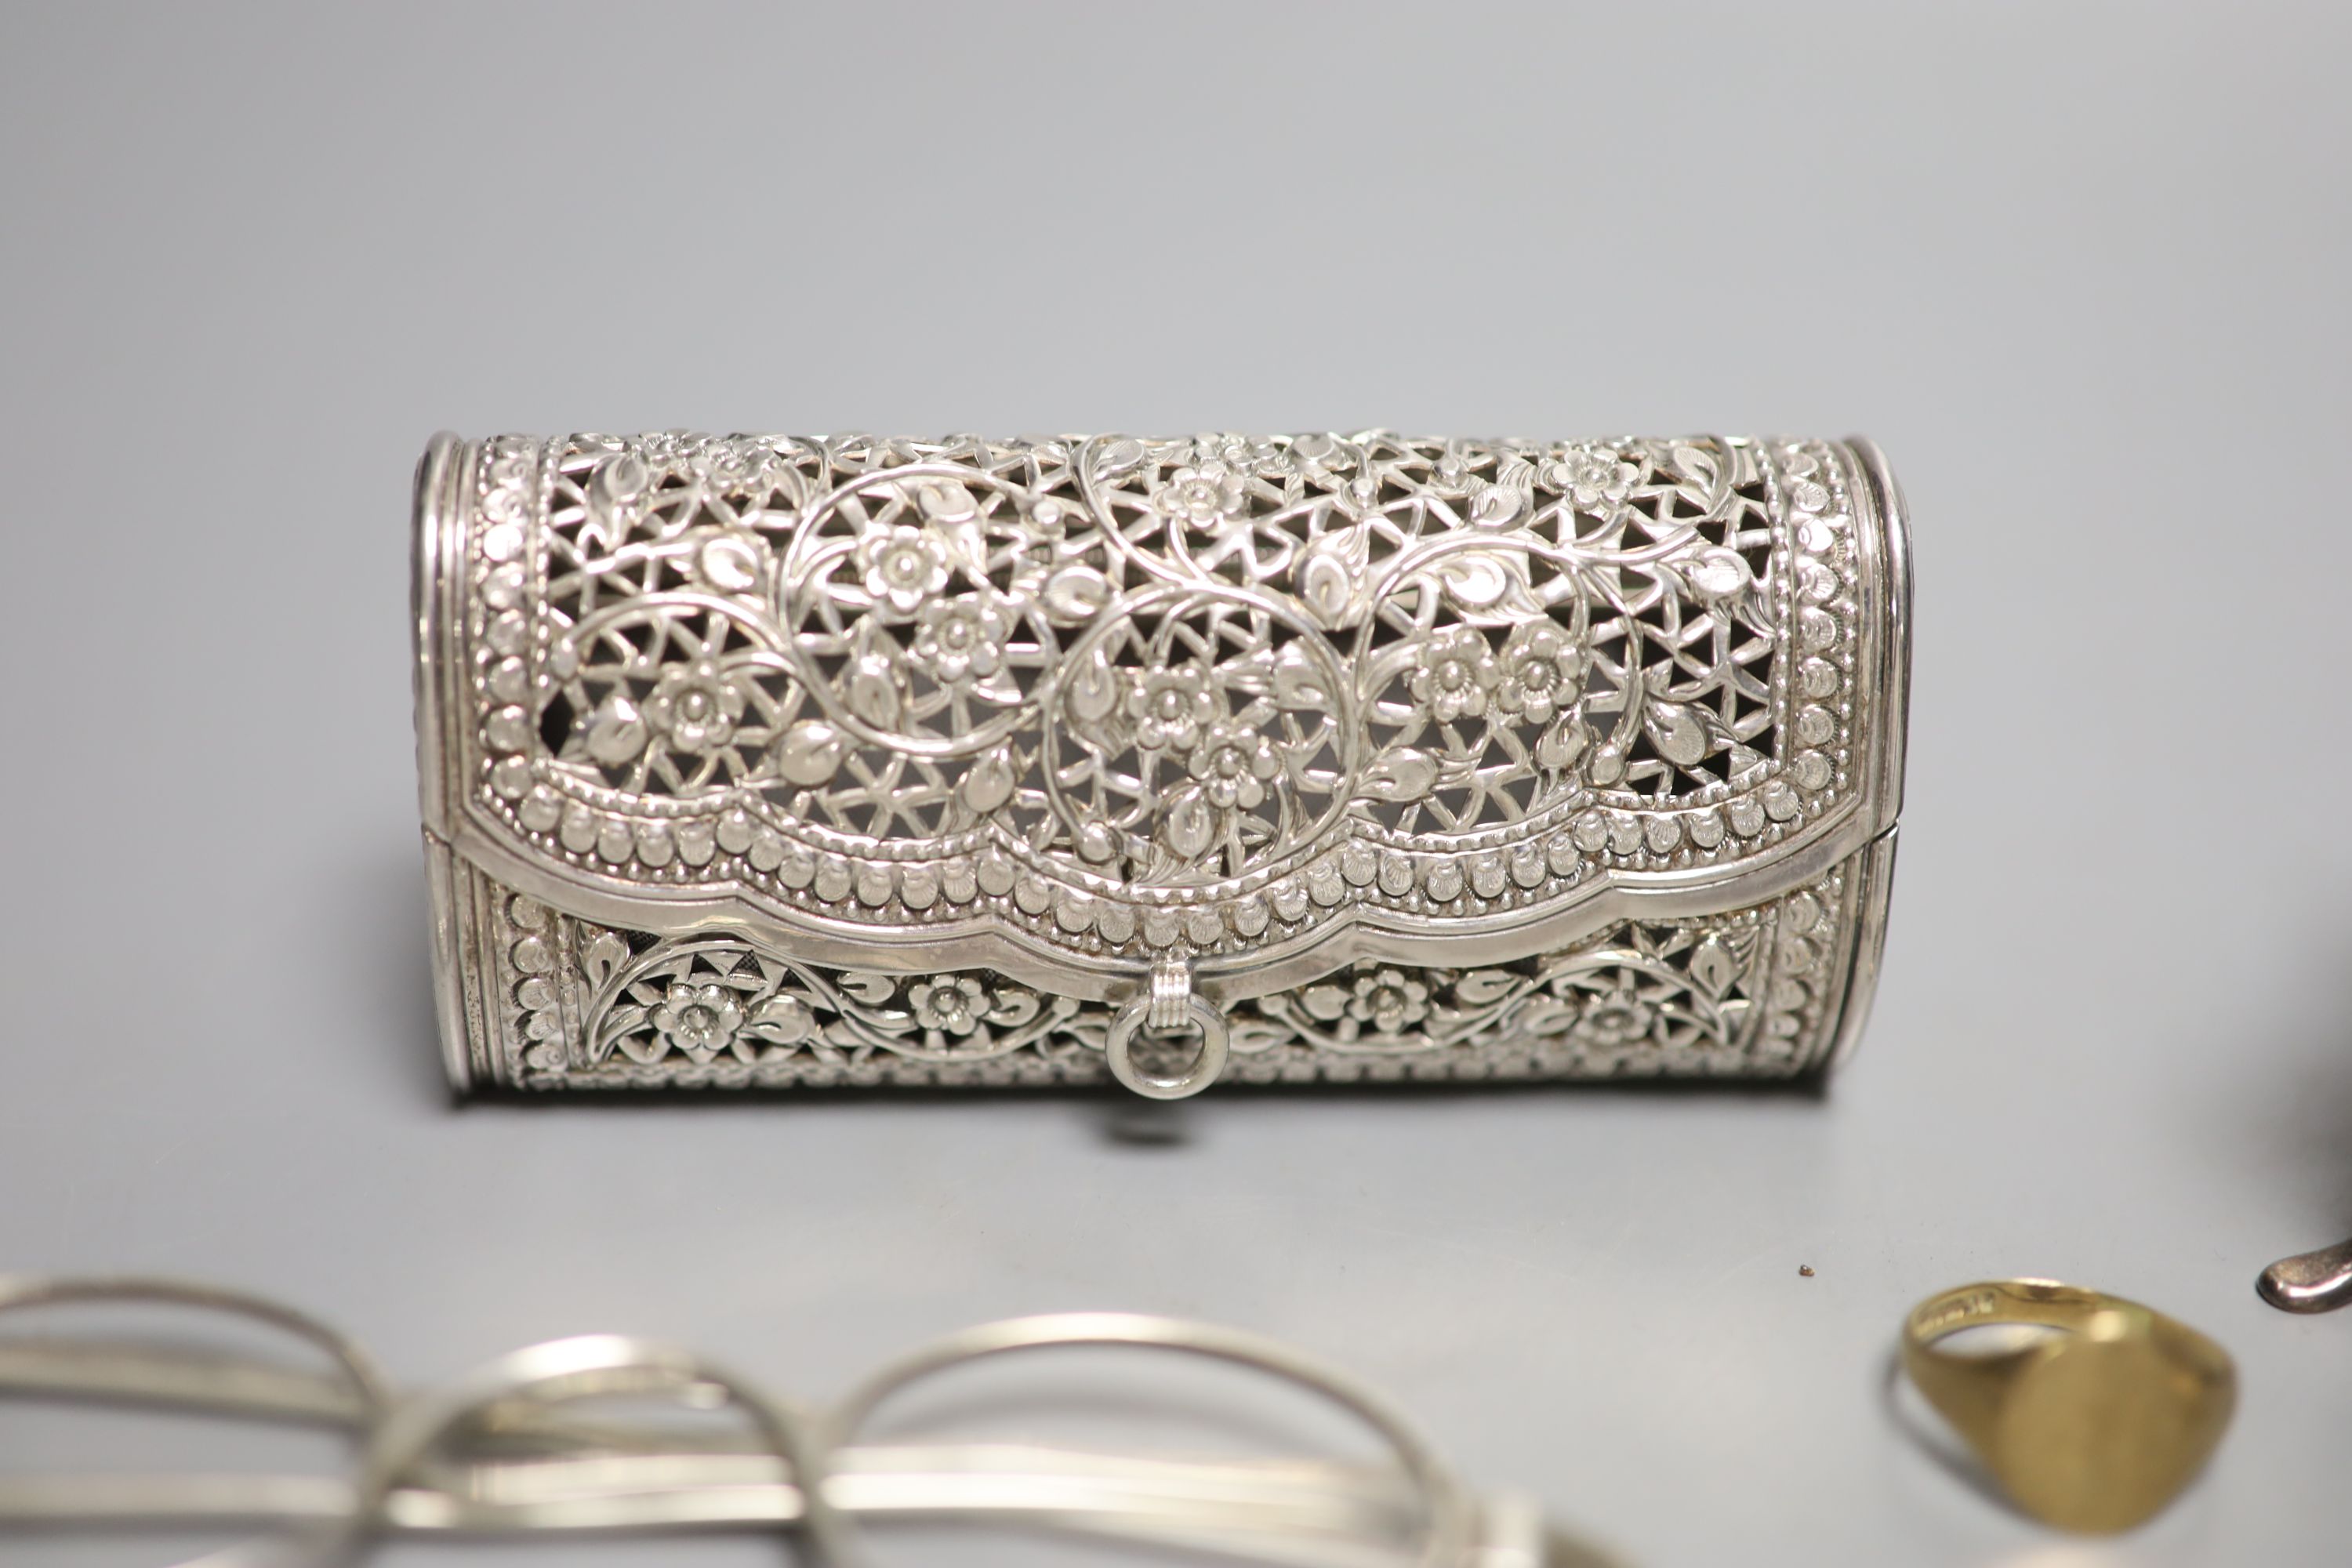 A silver trinket box with velvet-lined interior, an Anglo-Indian white metal coin purse and sundry - Image 3 of 6